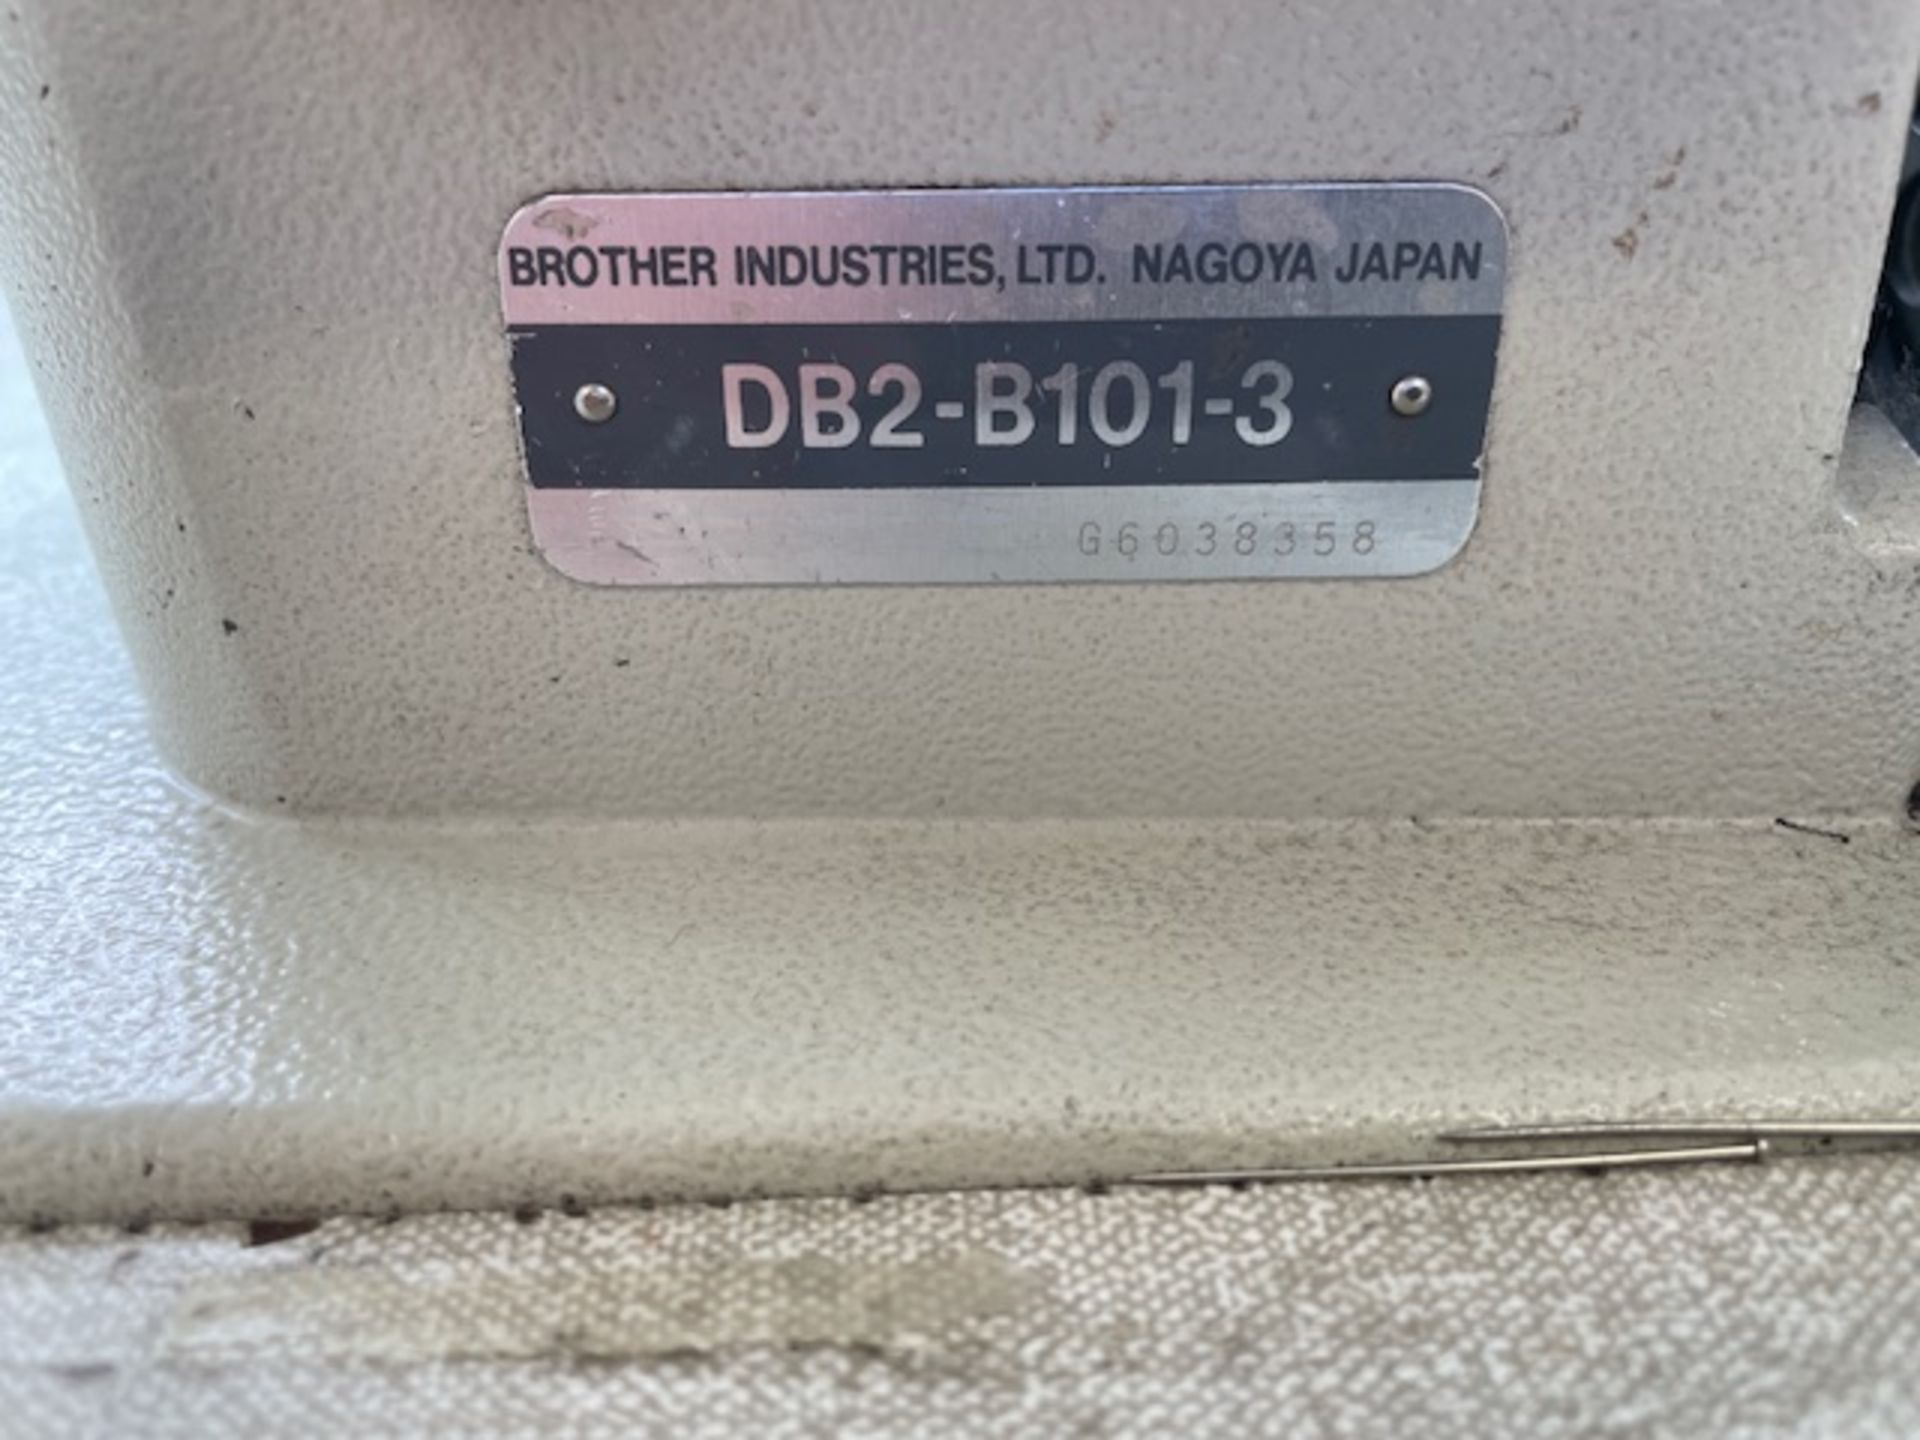 Brother DB2-B101-3 Twin Needle Lockstitch Machine, Single Phase (Location: Brentwood. Please Refer - Image 2 of 2